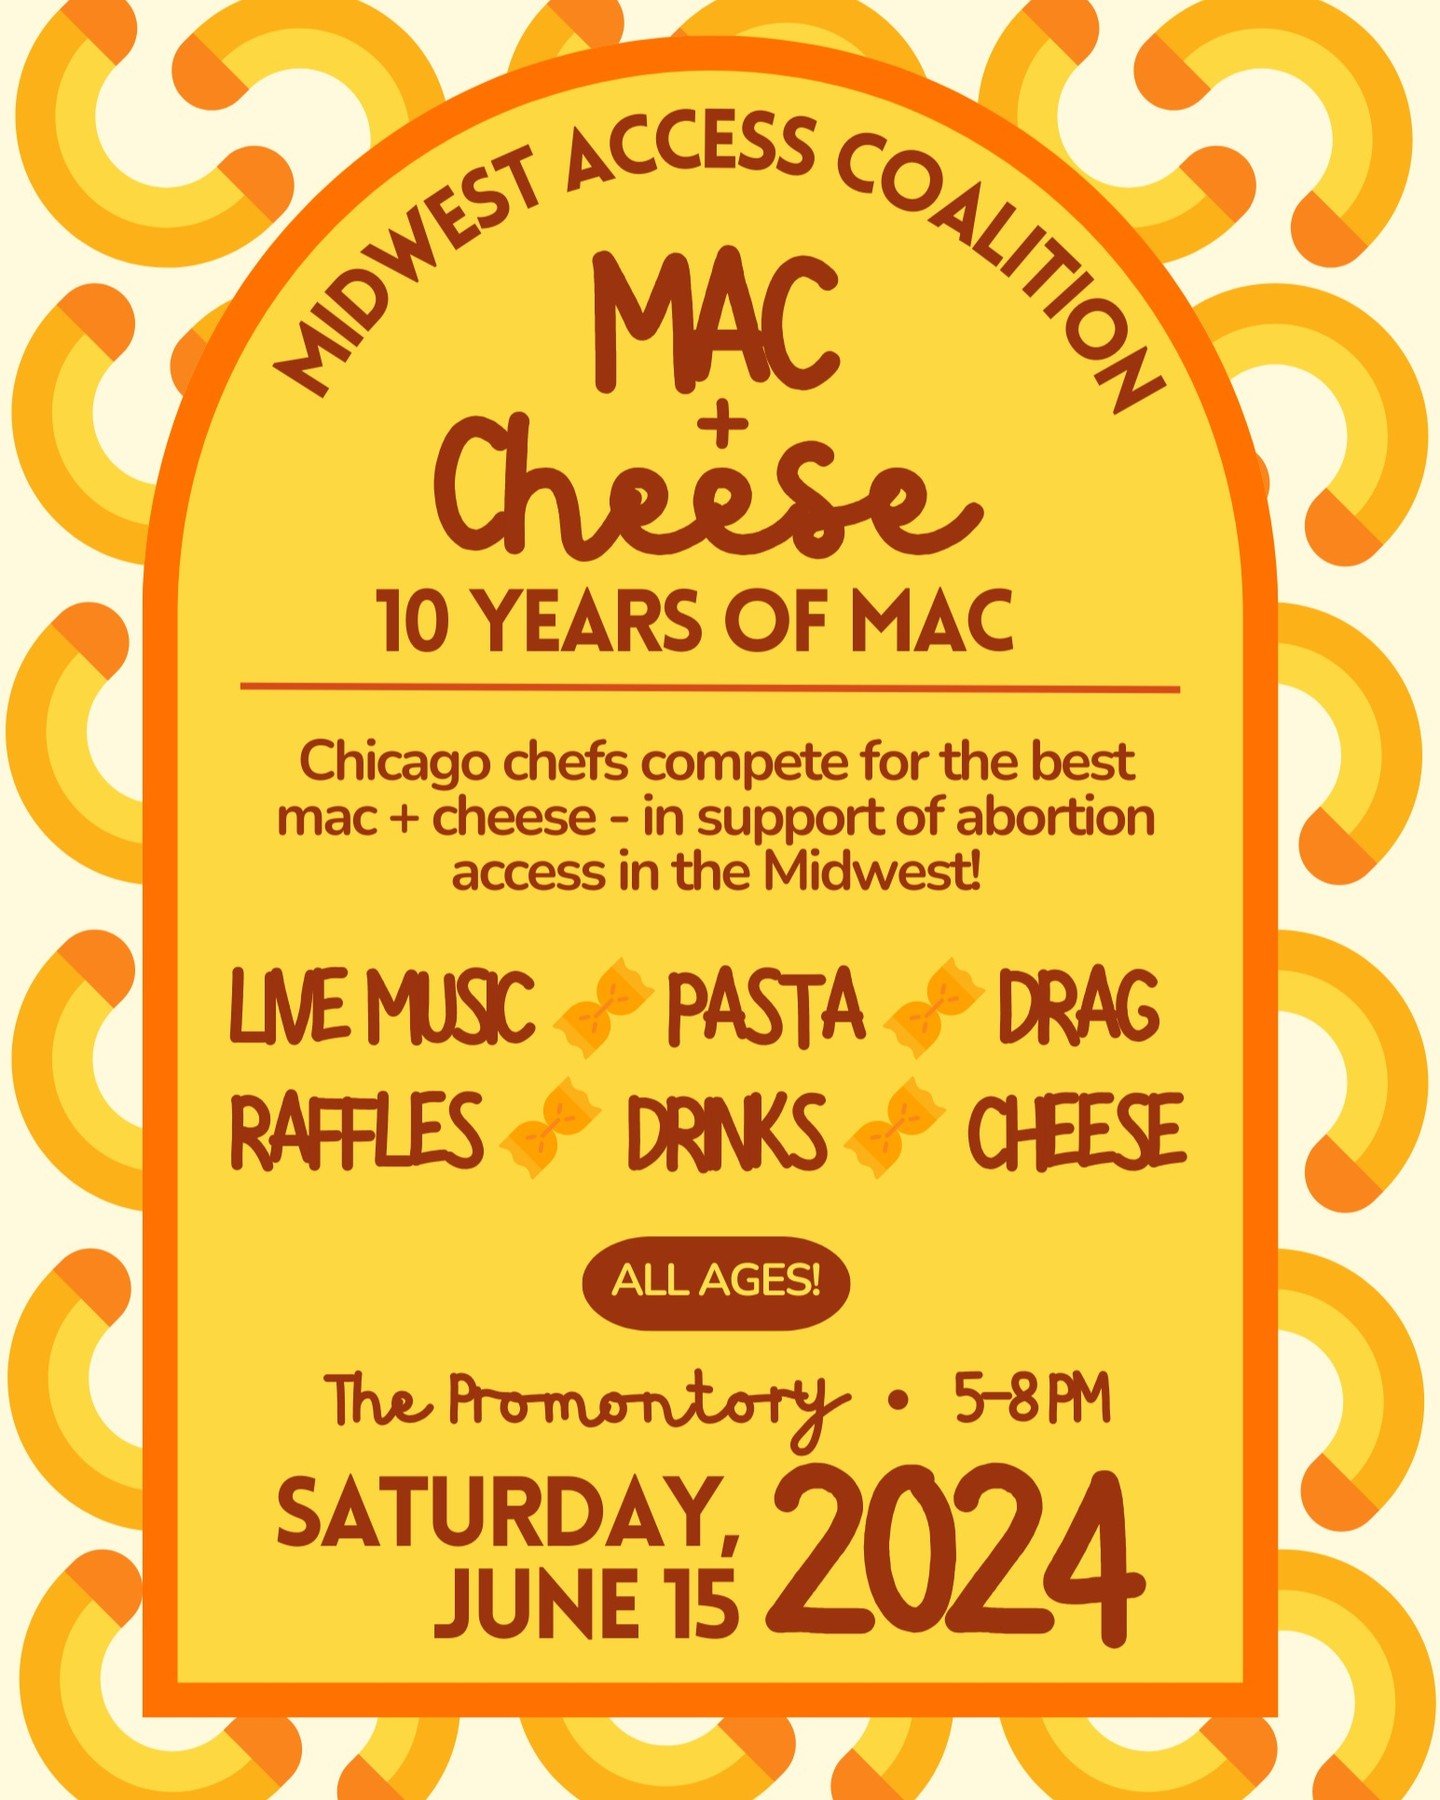 This summer is Midwest Access Coalition's 10th birthday!!! 🎉 And that means the long-awaited return of our annual fundraiser - MAC&nbsp;+ Cheese - is finally here! On June 15, your favorite local Chicago restaurants (including @parsonschicken @smack